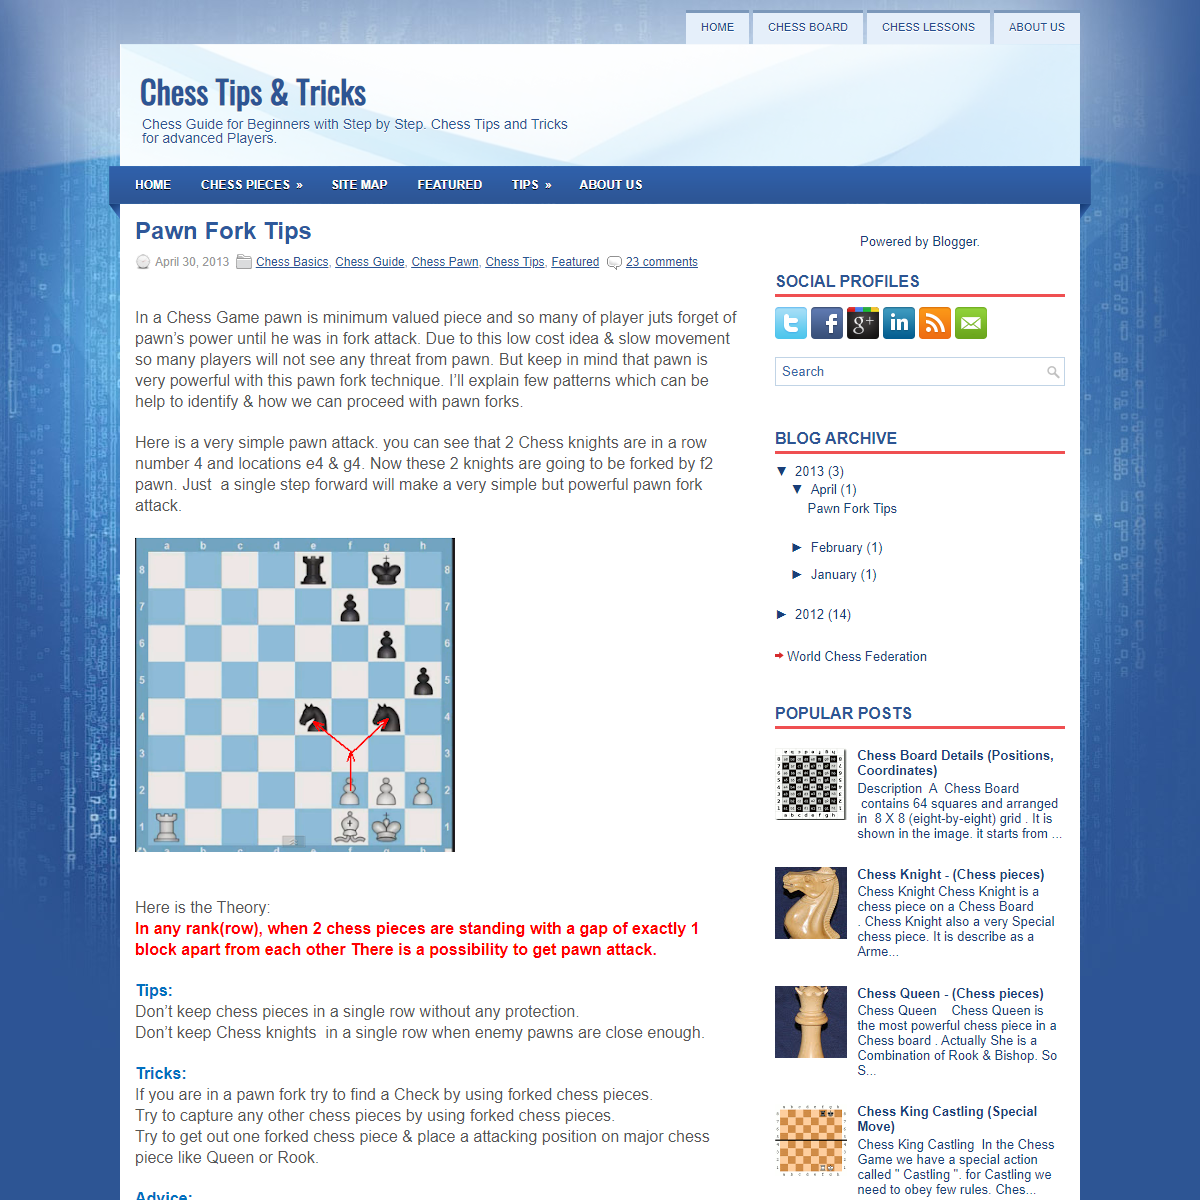 A complete backup of https://chess-tips.blogspot.com/2013/04/pawn-fork-tips.html